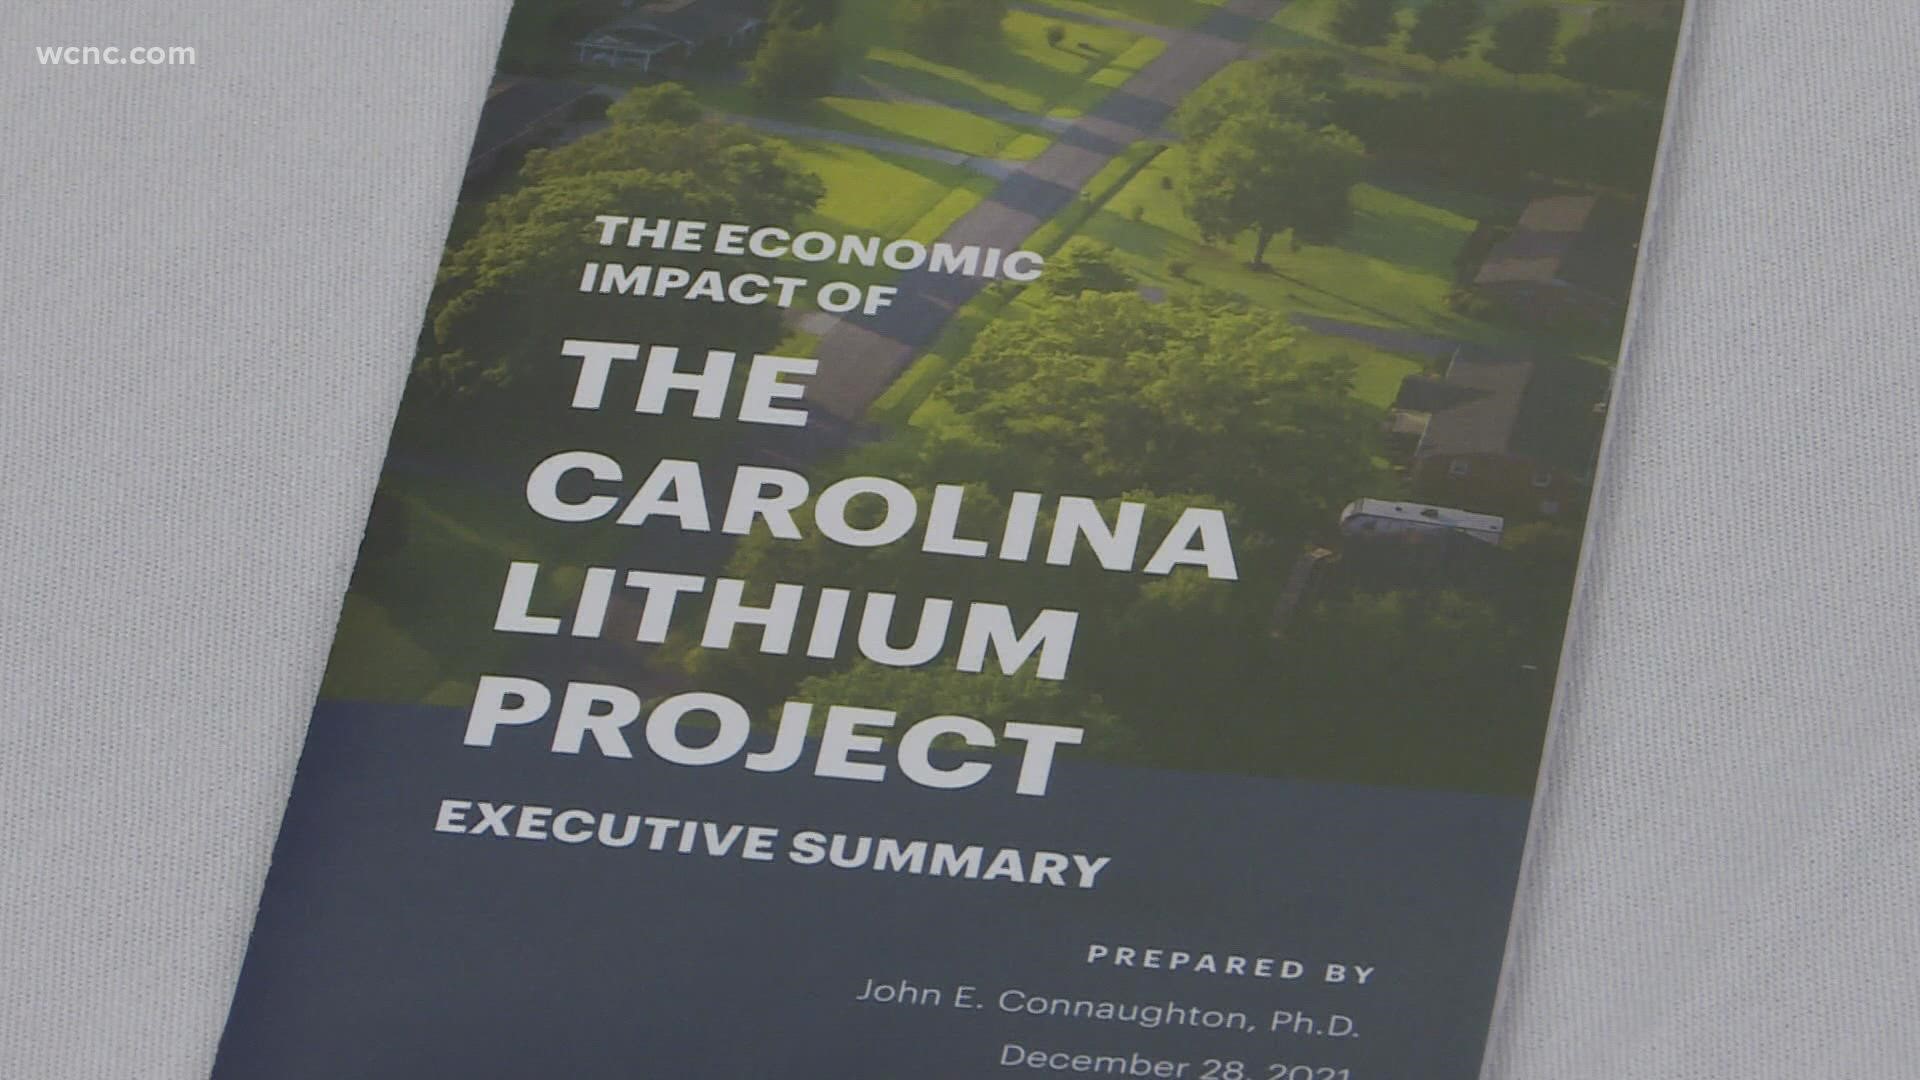 For months we've been reporting on the piedmont lithium mine plans in gaston county and the backlash it's caused.